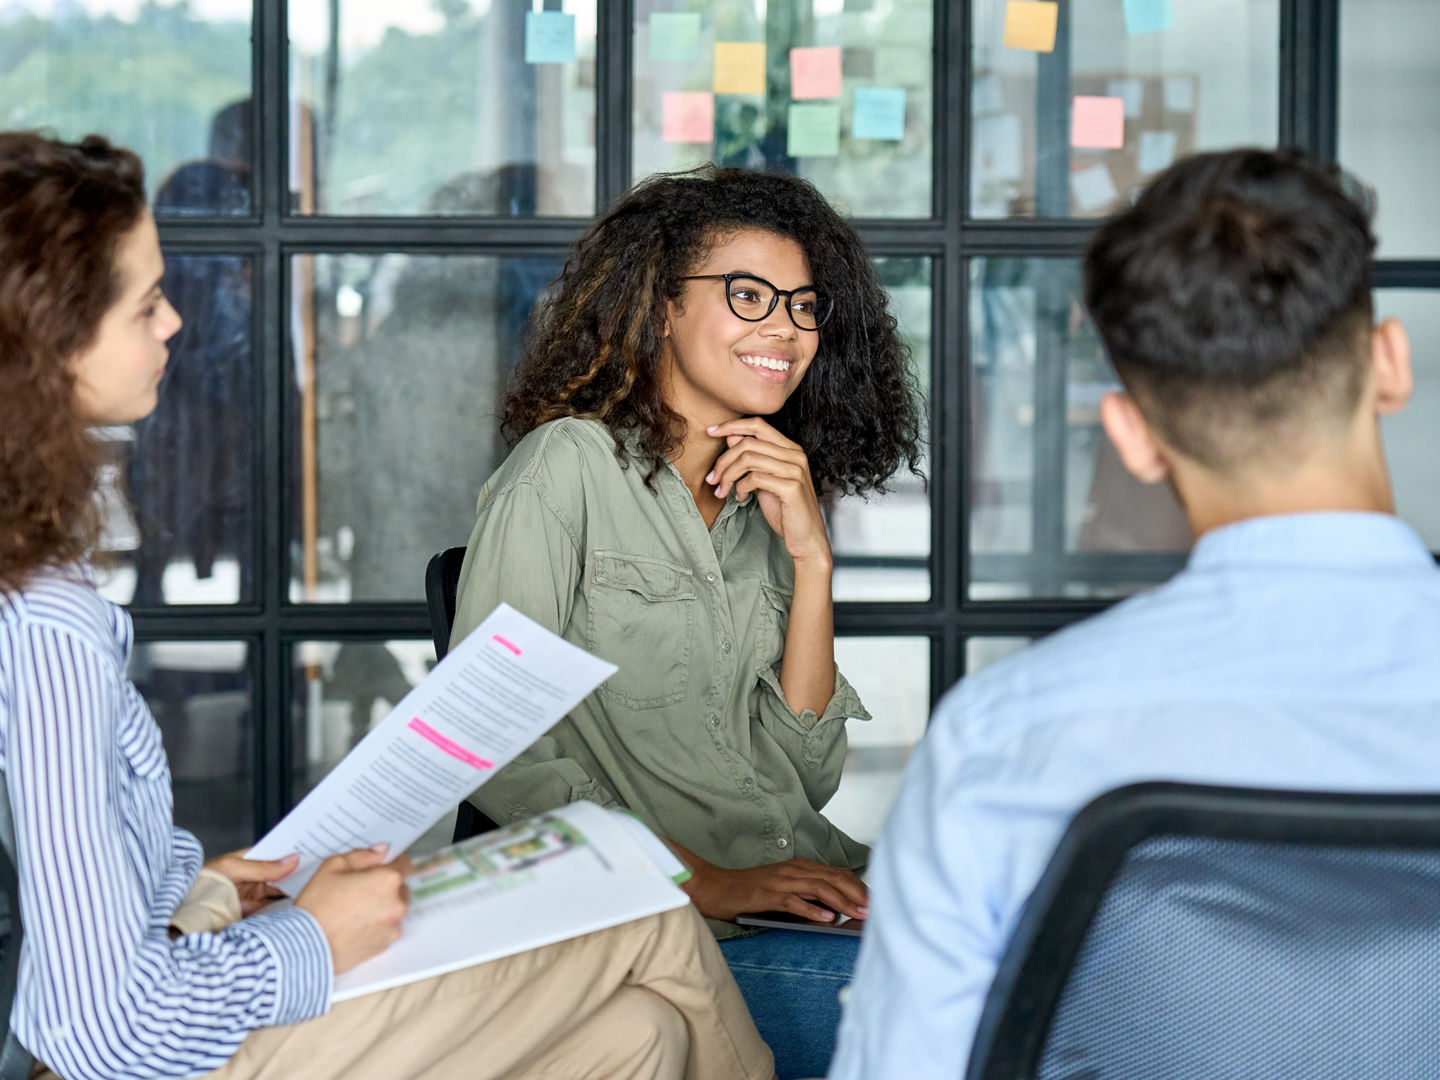 Happy young African American woman brainstorming marketing ideas about project strategy among diverse multiracial coworkers, business startup creative team or students group in office holding papers.